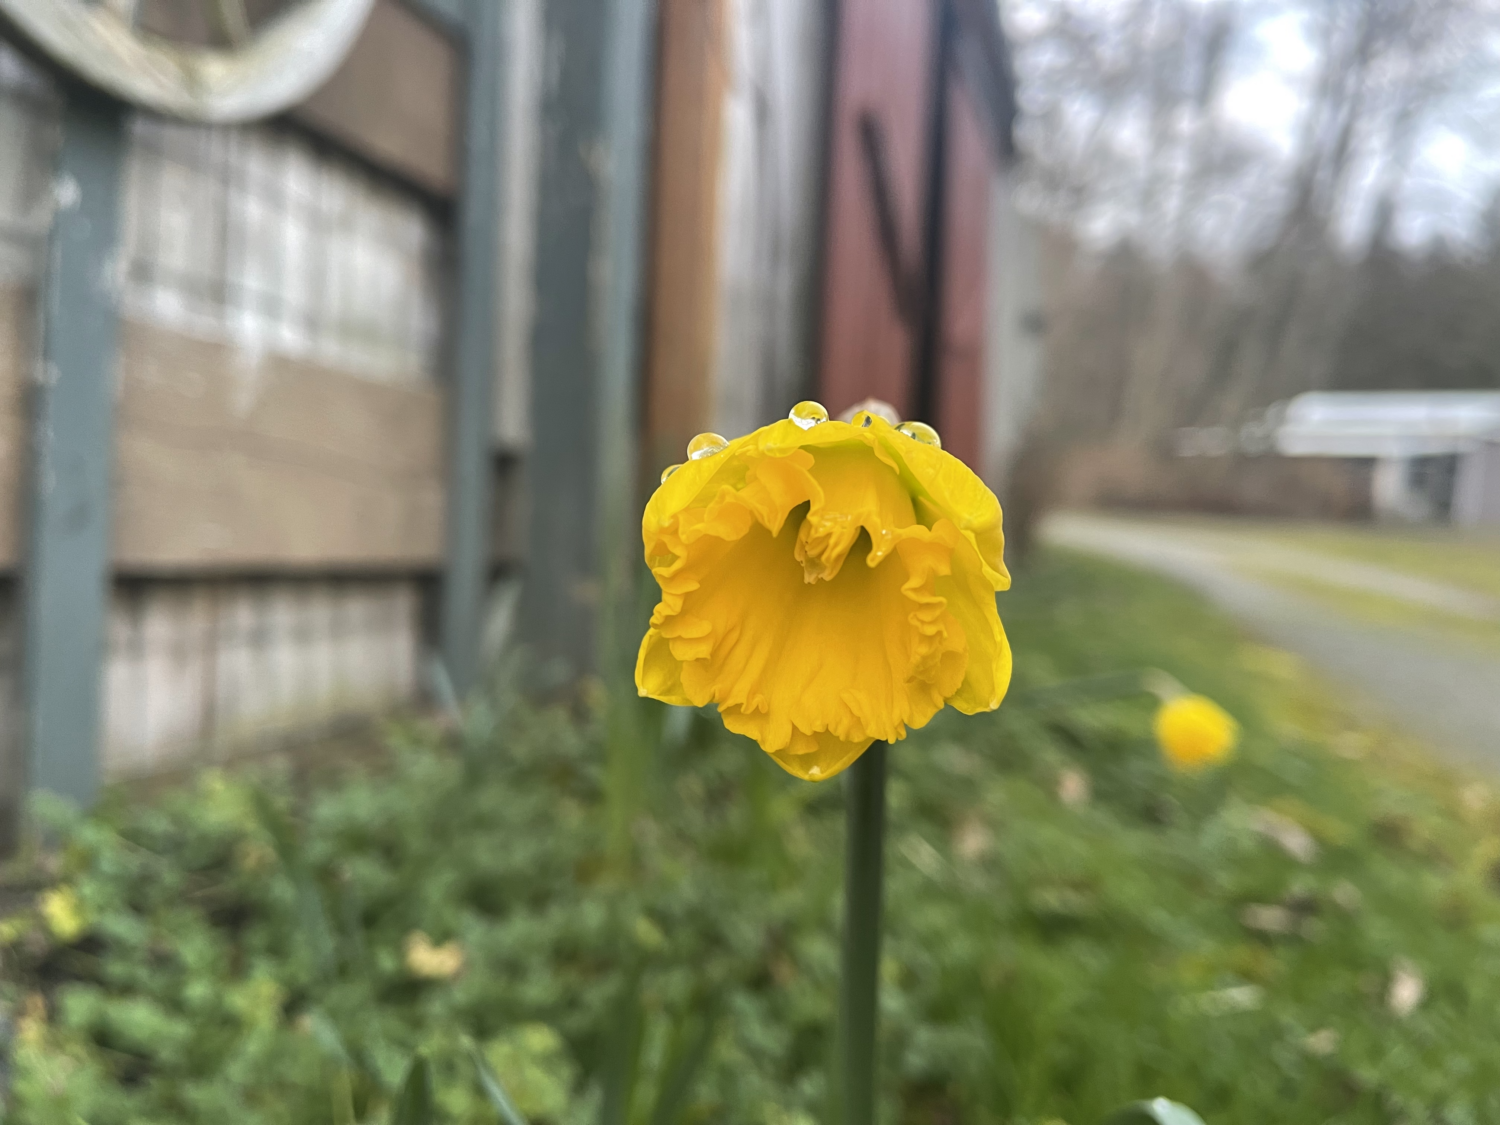 Change is in the air - daffodils are opening.